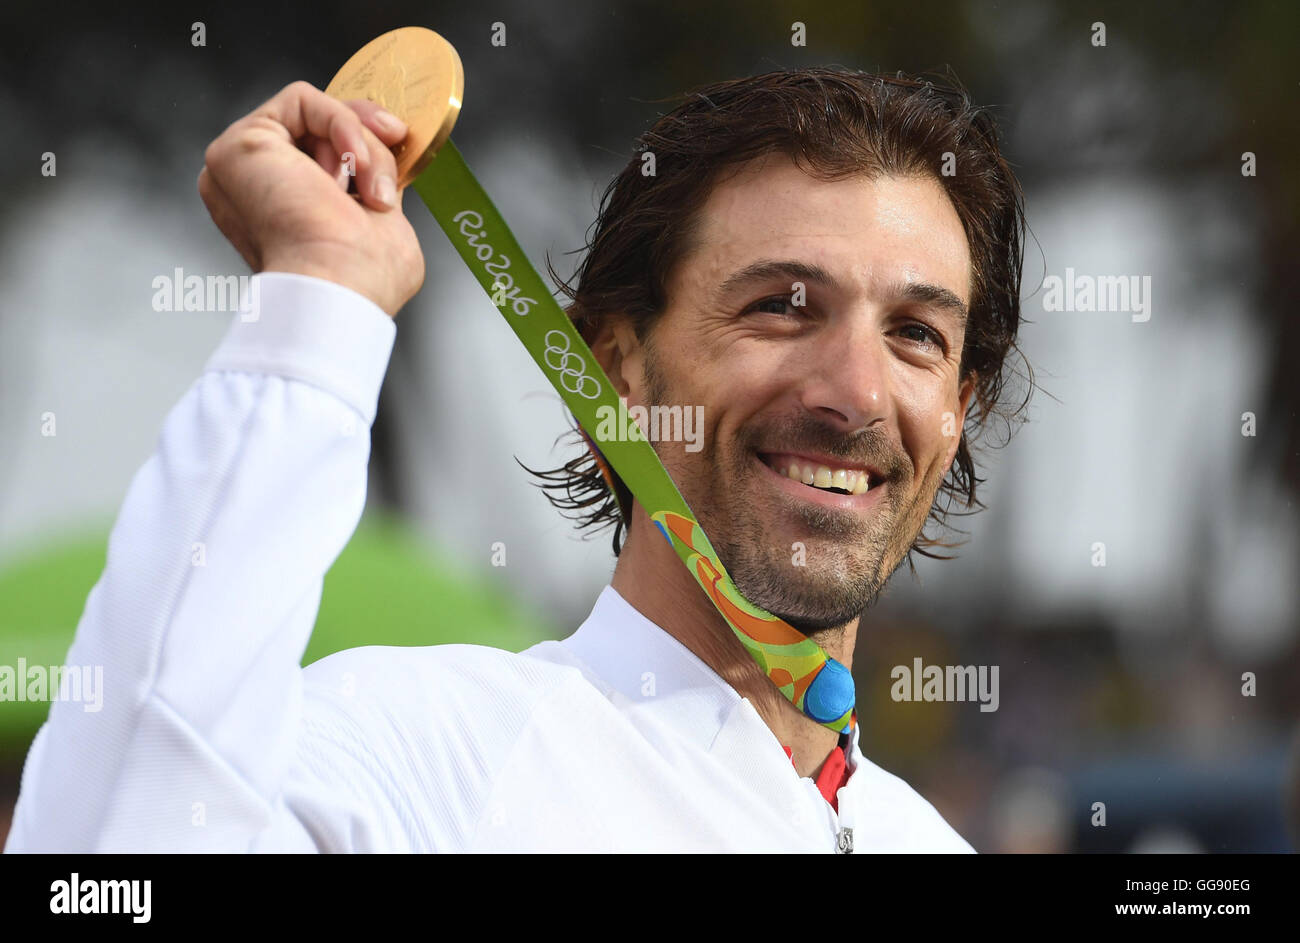 Rio de Janeiro, Brazil. 10th Aug, 2016. Fabian Cancellara of Switzerland celebrates on the podium with the gold medal after winning the men's Individual Time Trial of the Rio 2016 Olympic Games Road Cycling events at Pontal in Rio de Janeiro, Brazil, 10 August 2016.Photo: Sebastian Kahnert/dpa/Alamy Live News Stock Photo